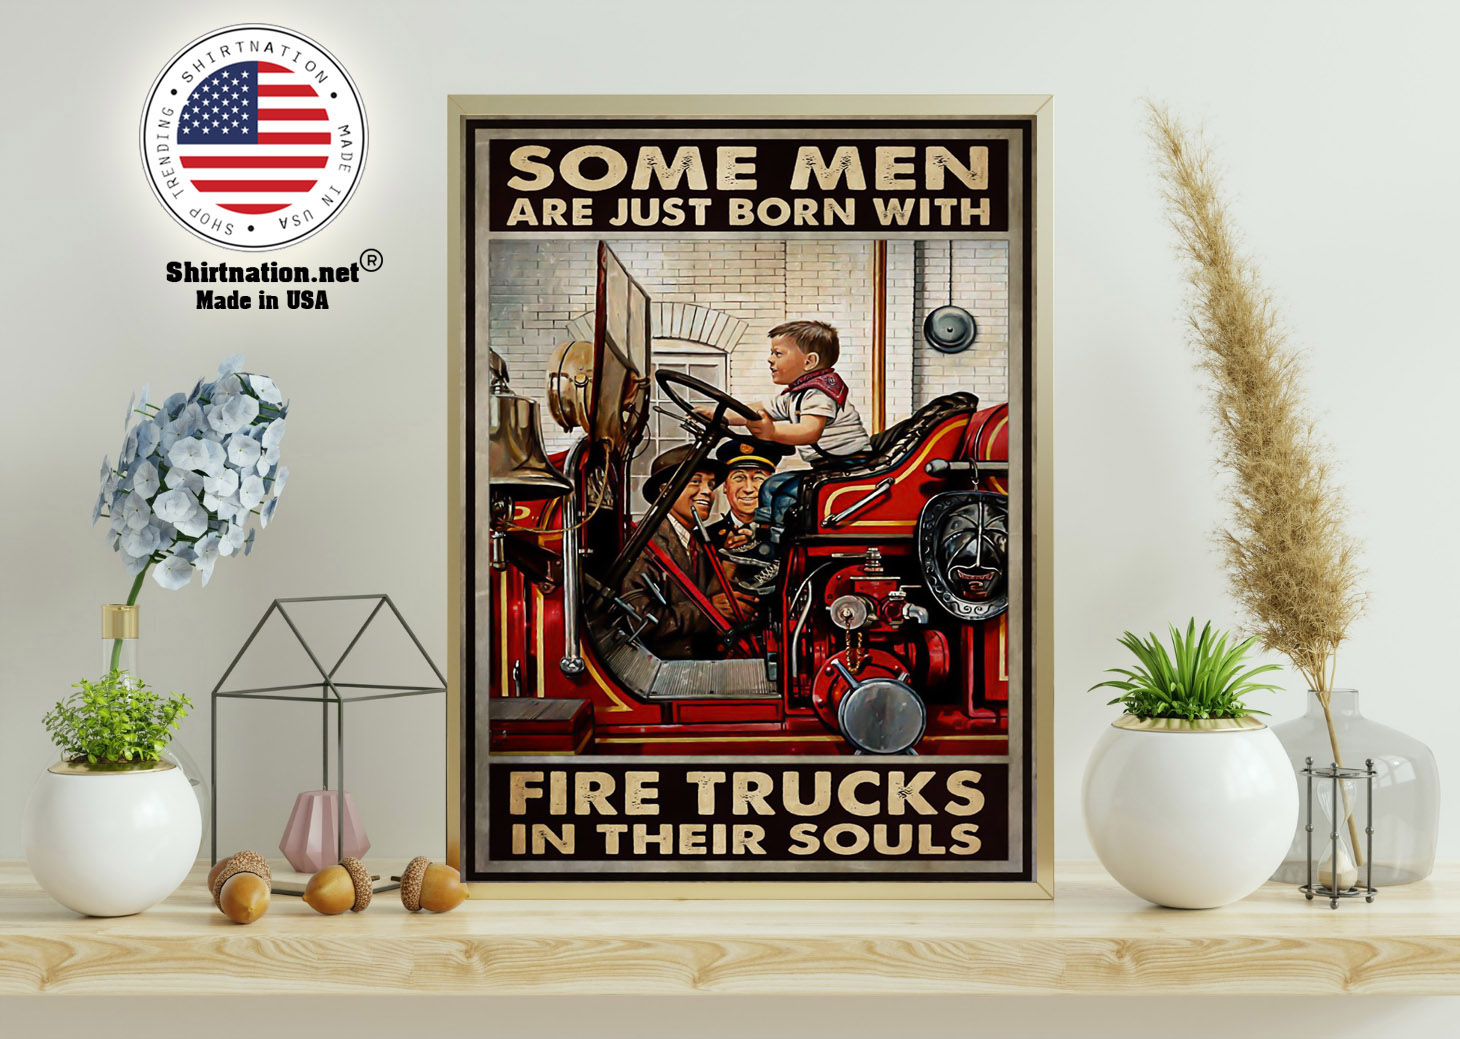 Some men are just born with fire trucks in their souls poster 11